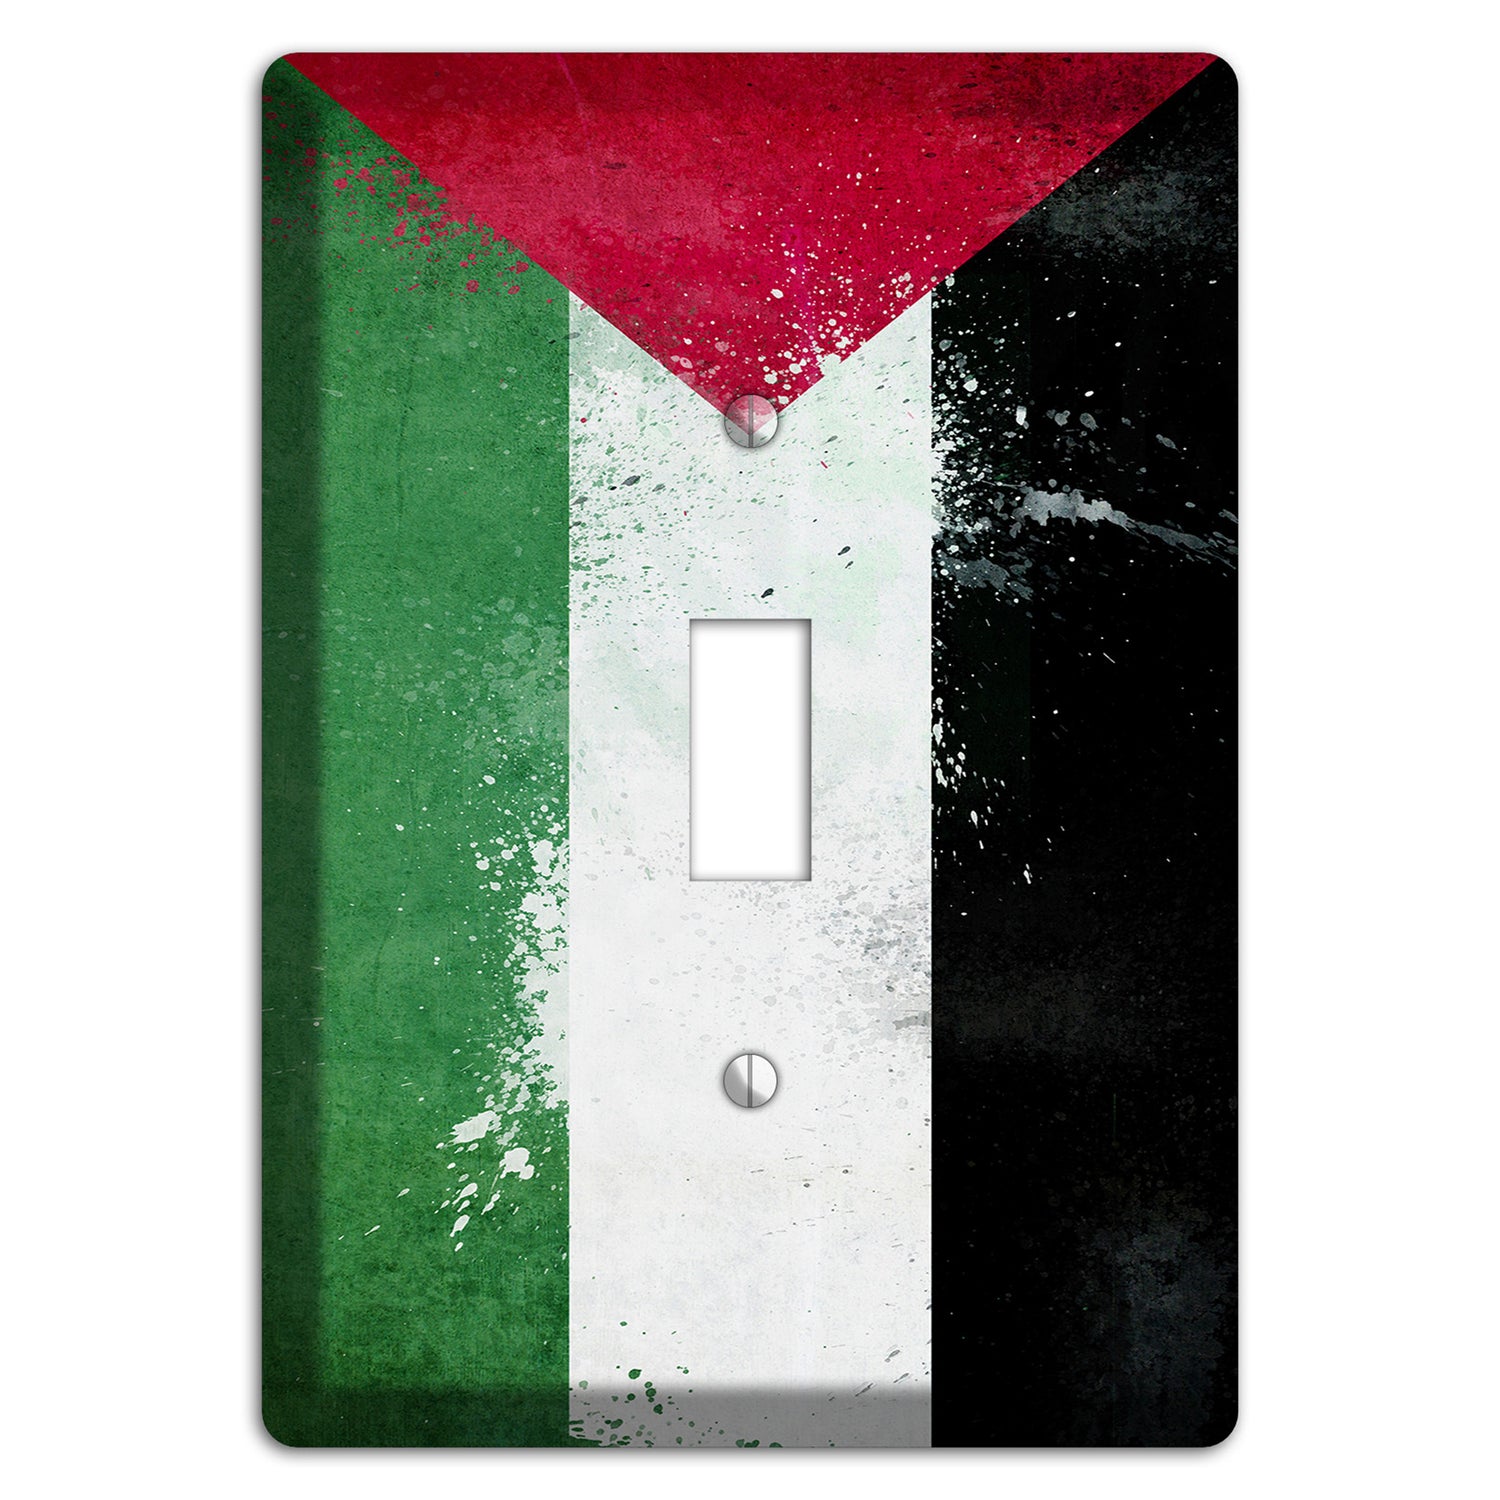 Palestine Cover Plates Cover Plates